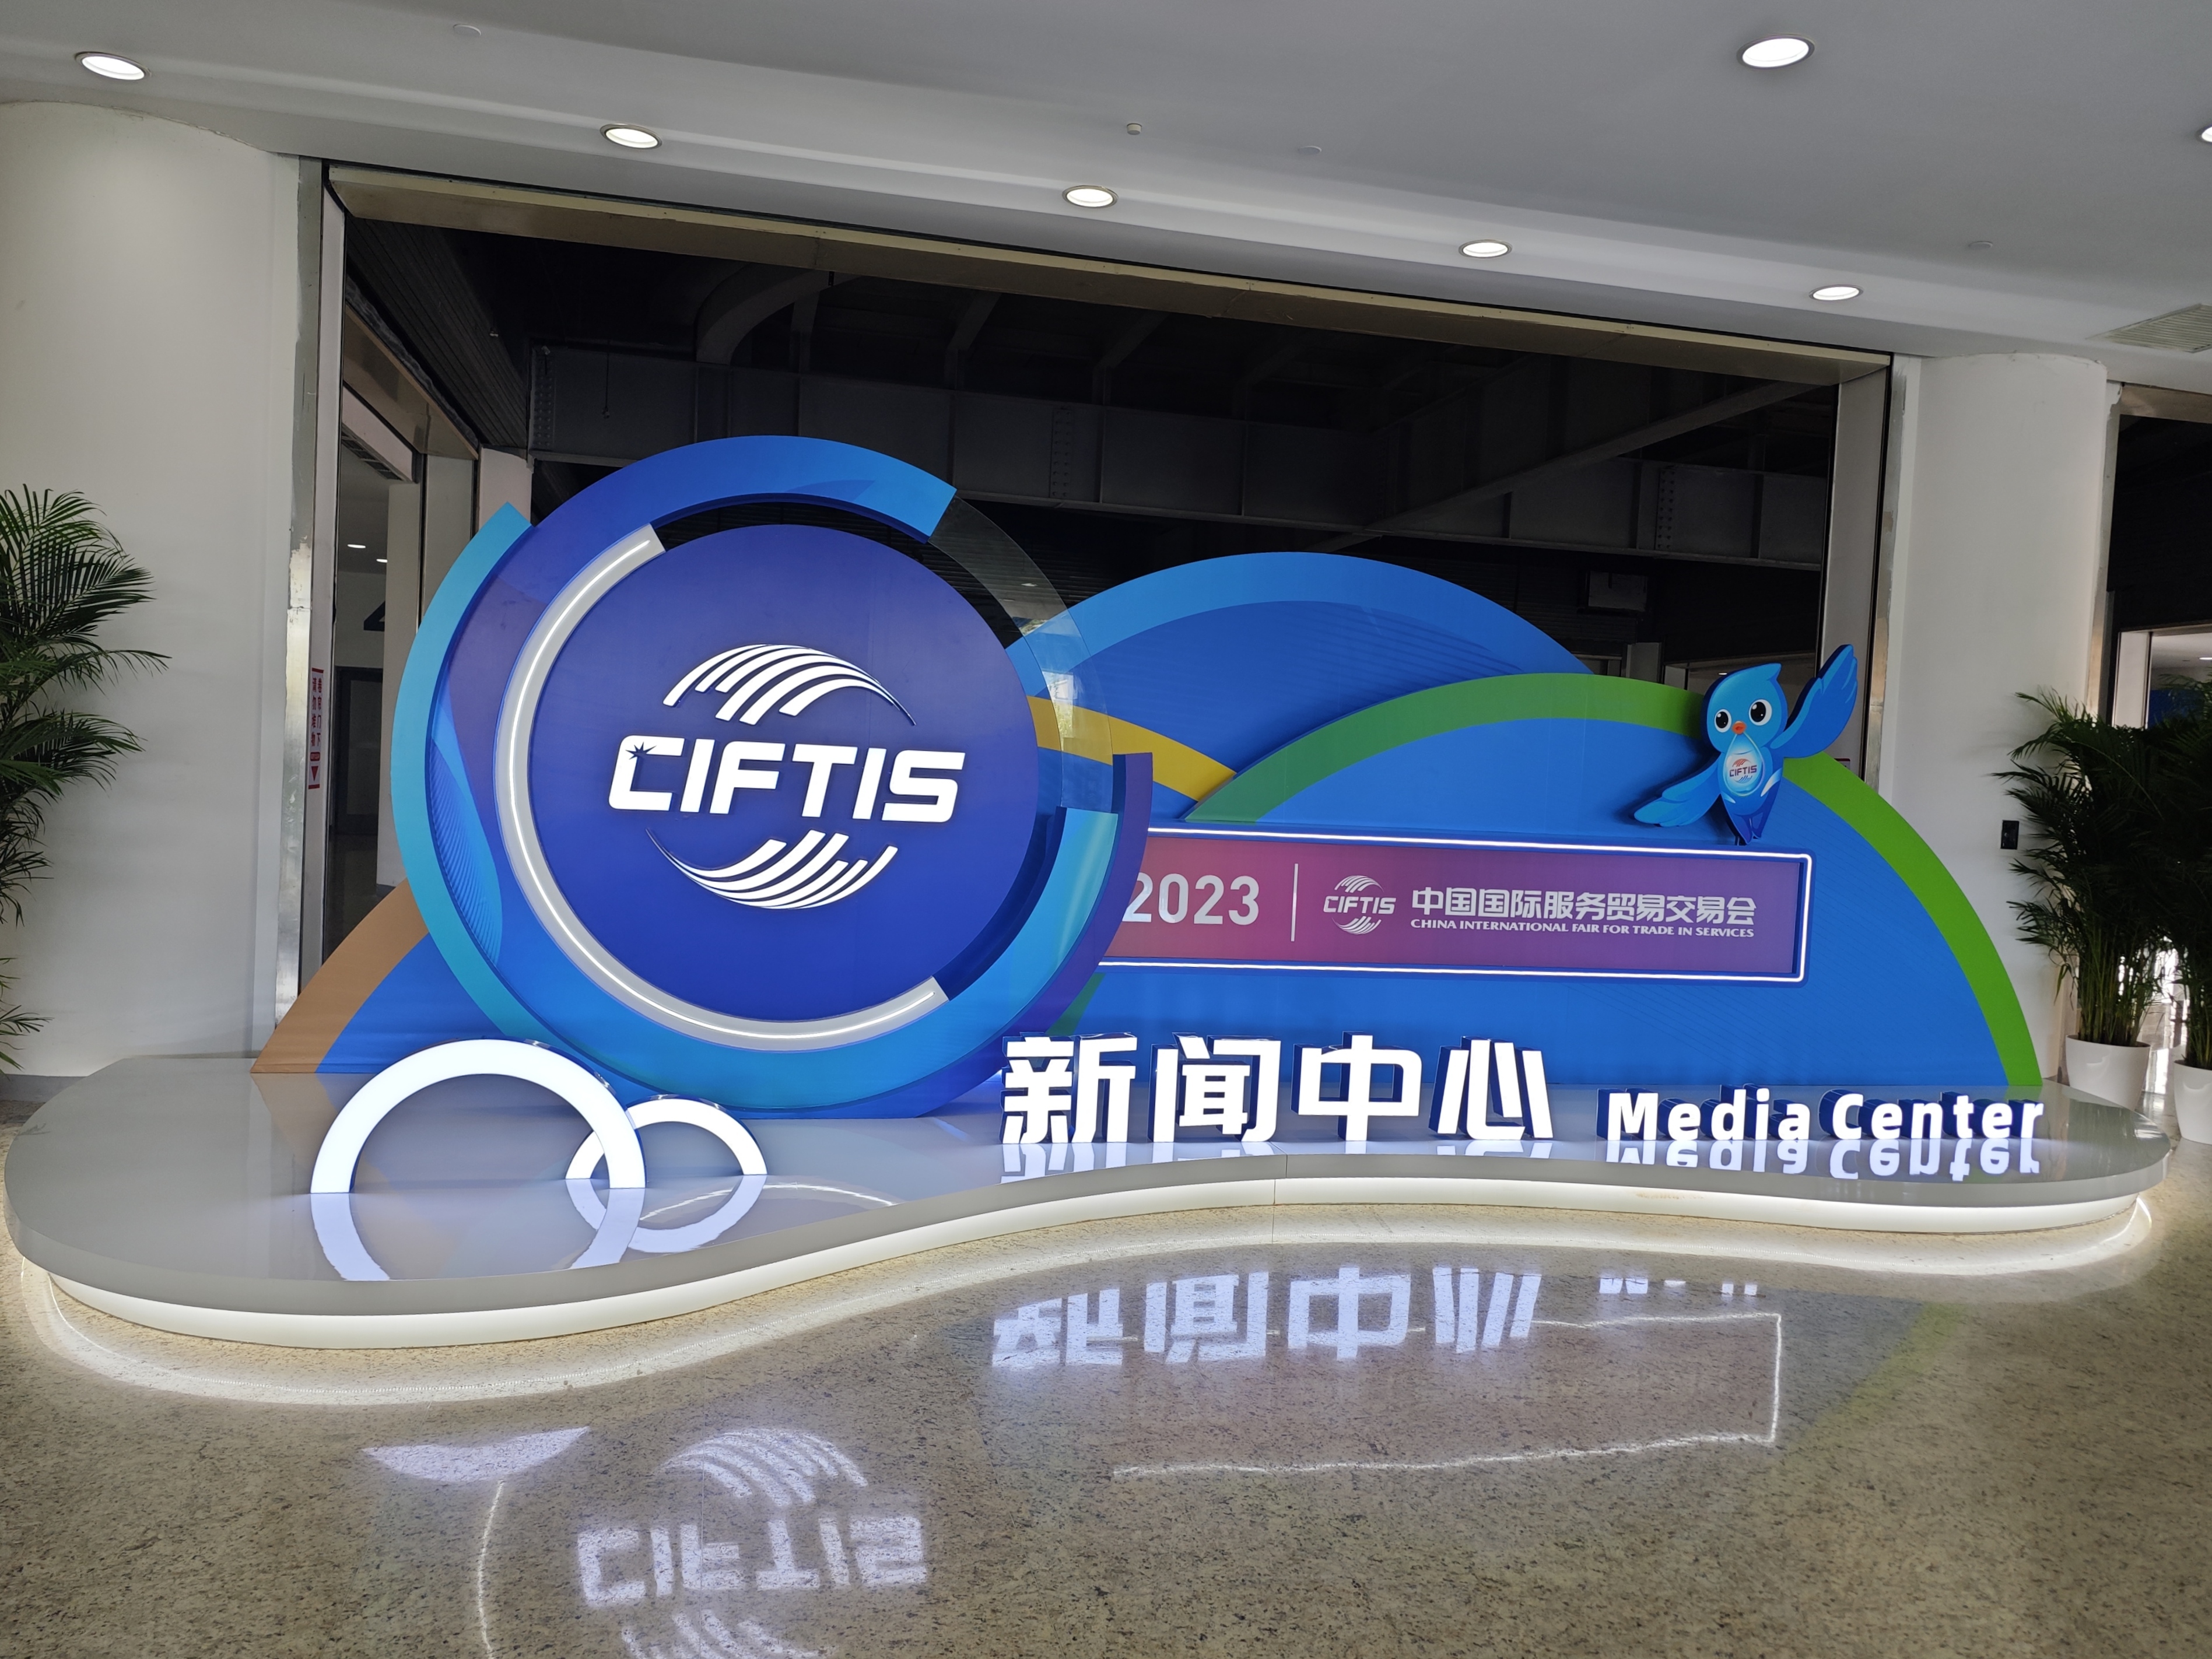 The Media Center for CIFTIS 2023, China National Convention Center, in Beijing, August 29, 2023. /CGTN